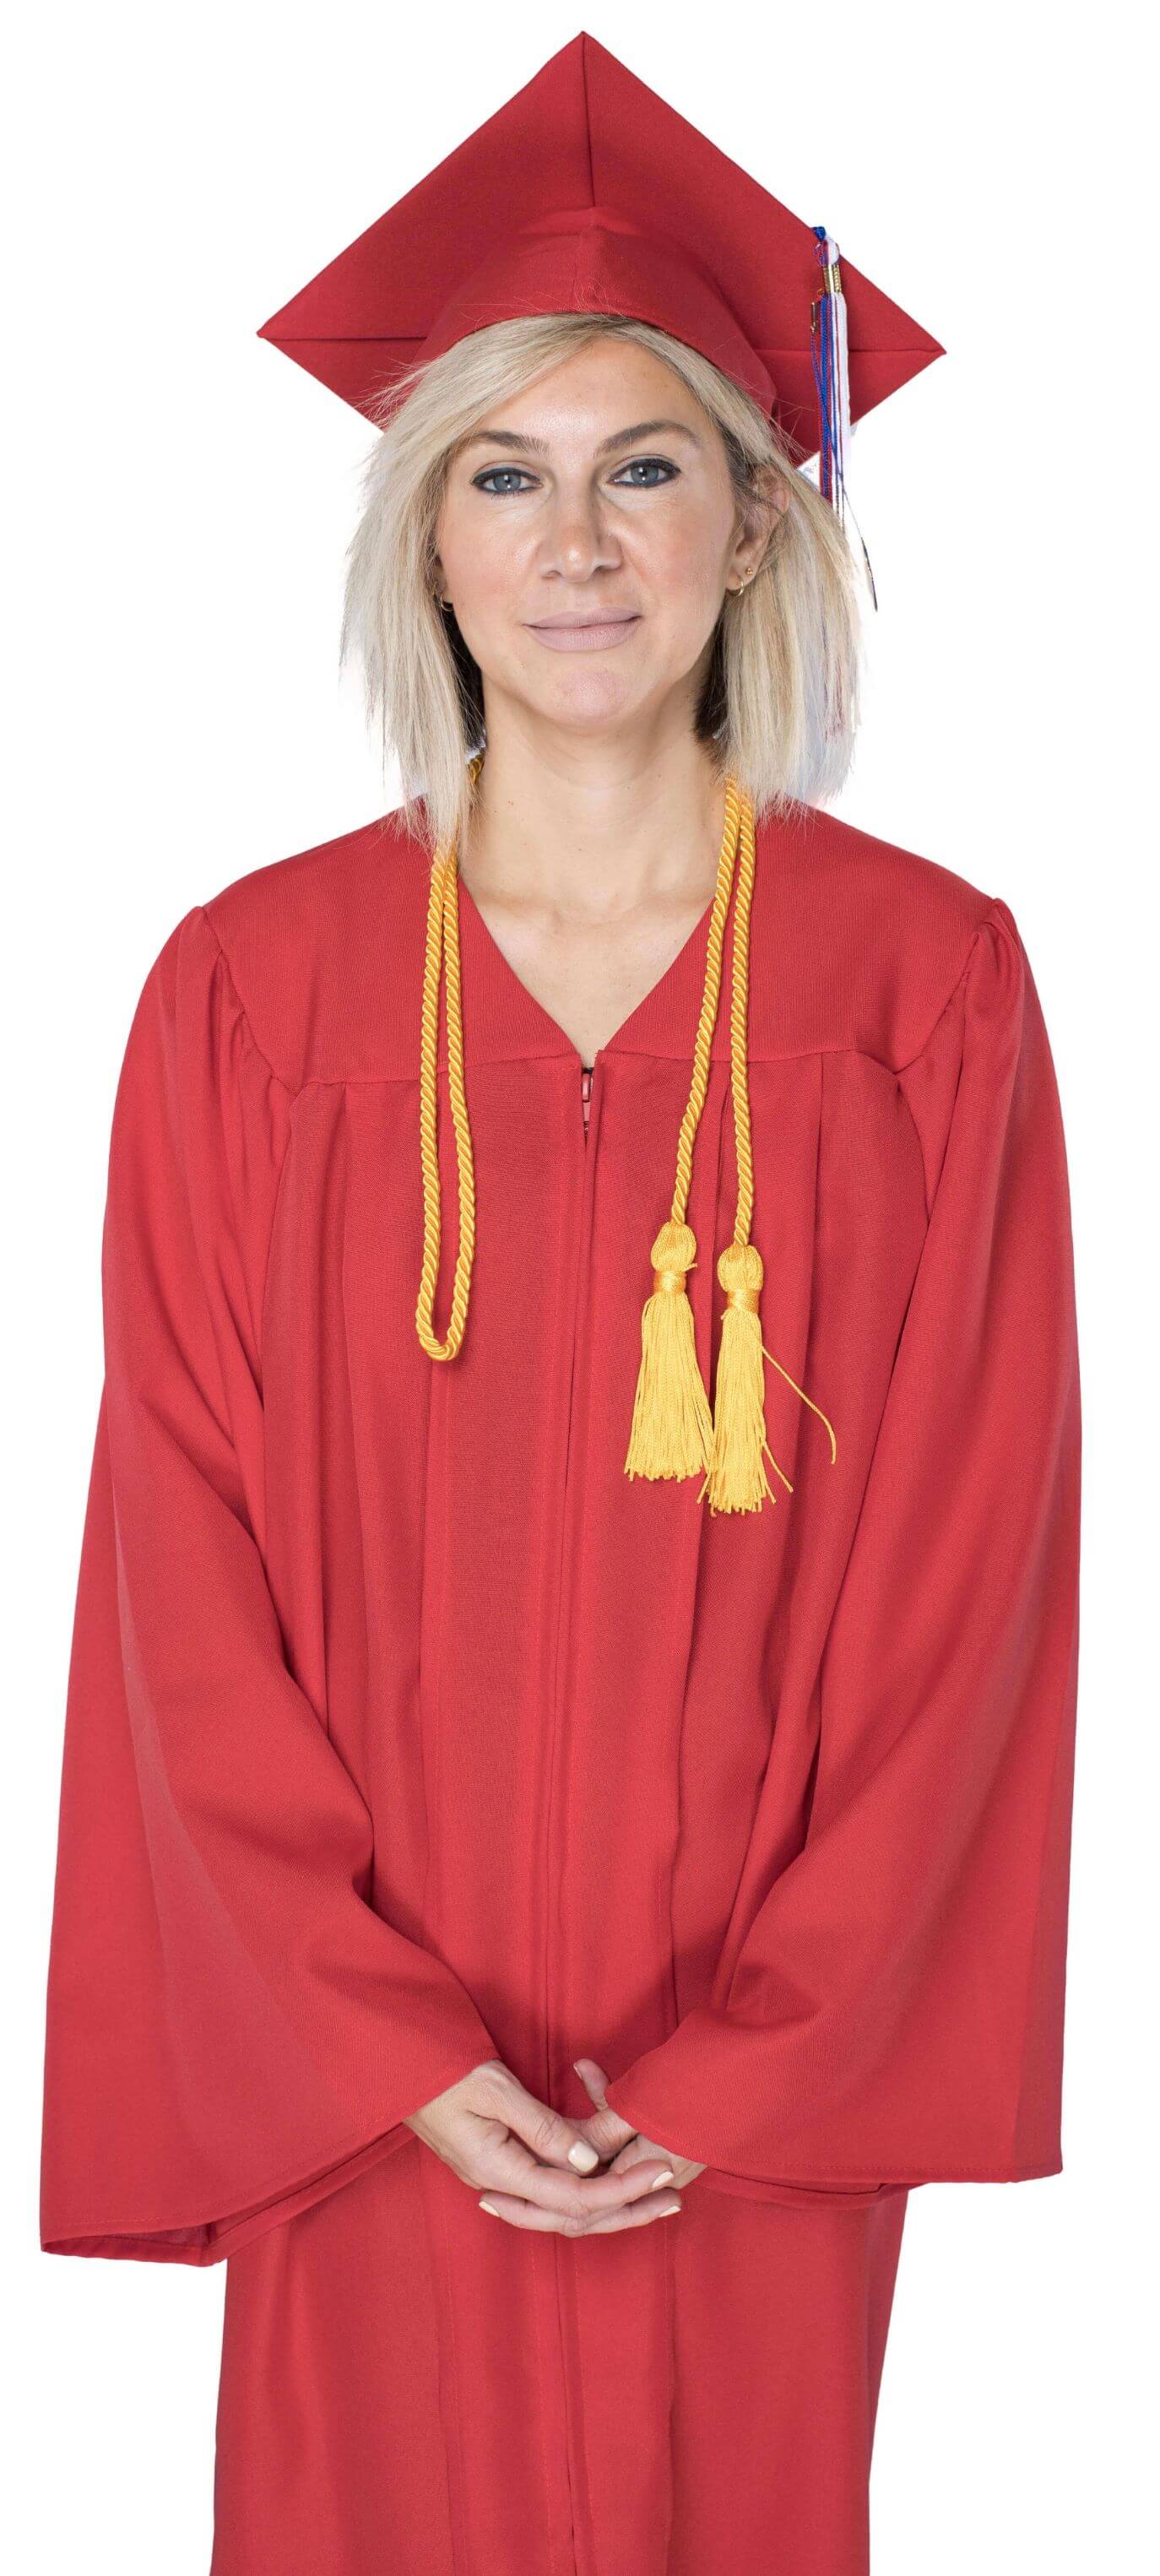 Basic Grad Gear Package #4 -Includes your Cap & Gown- A TOTAL SAVINGS OF  OVER $5 – Herff Jones